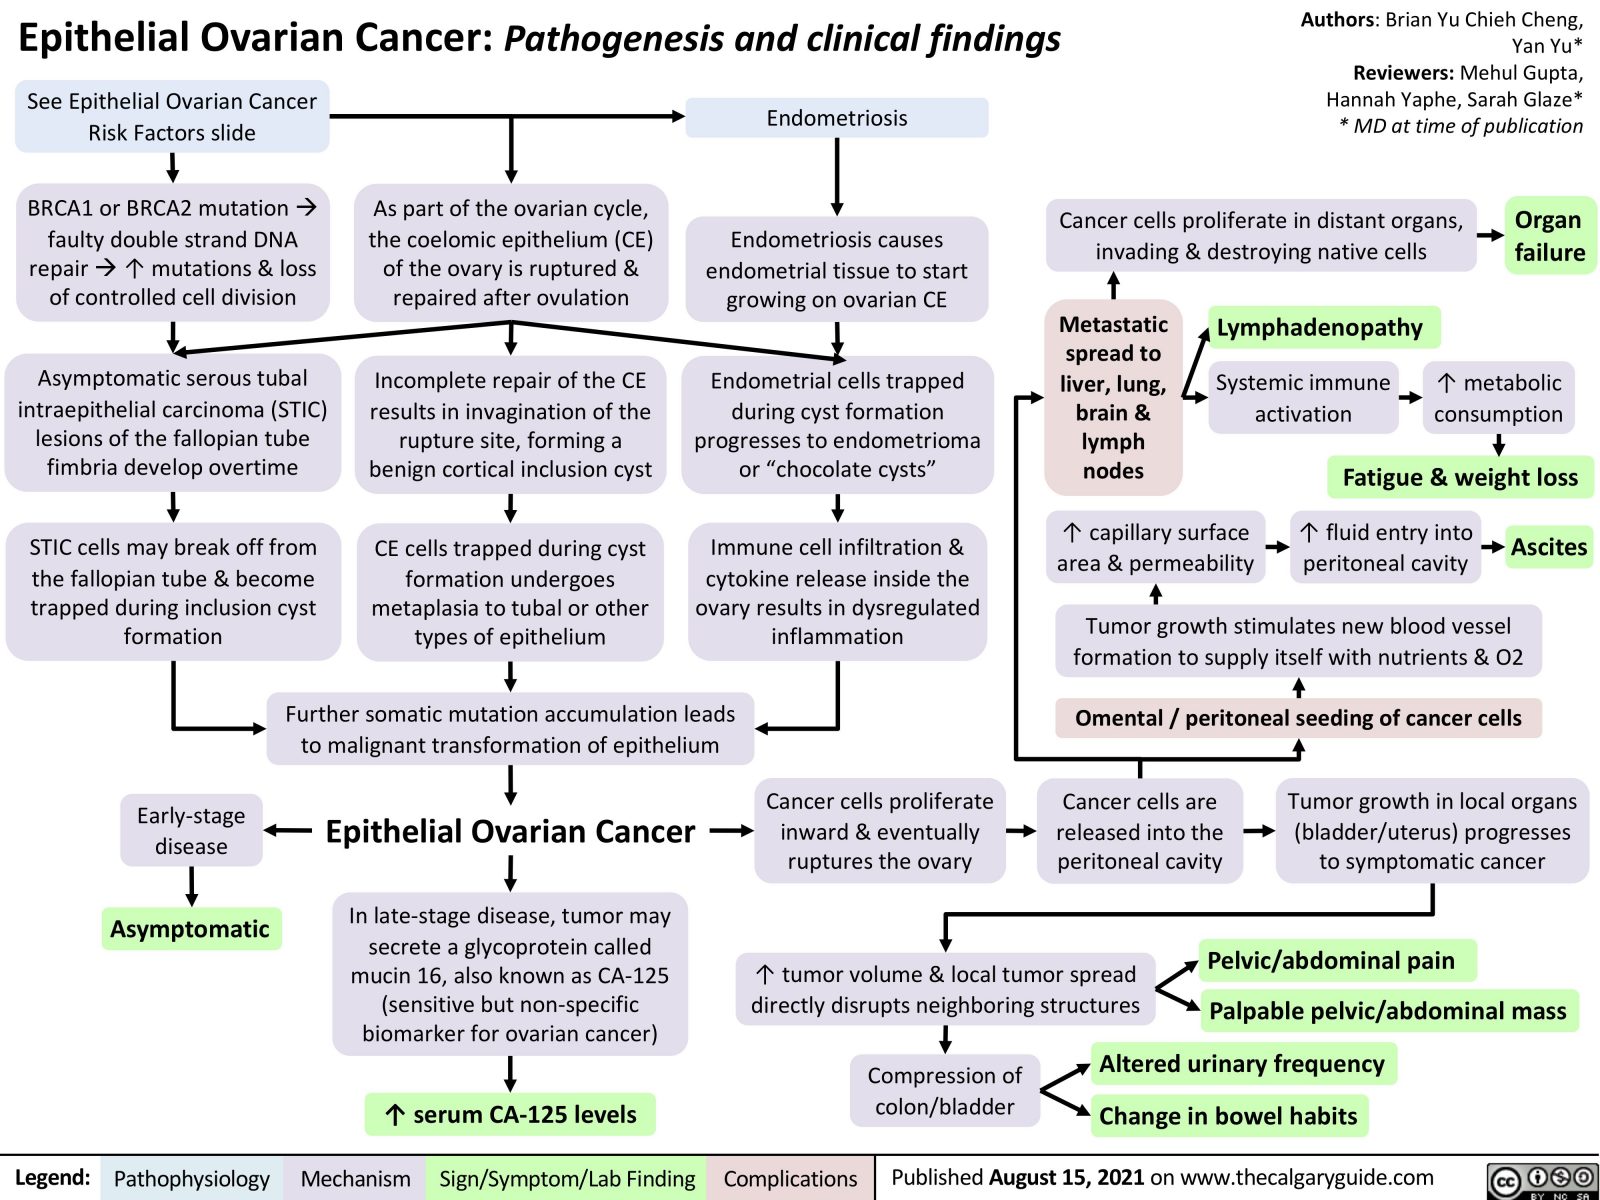 Epithelial Ovarian Cancer: Pathogenesis and clinical findings | Calgary ...